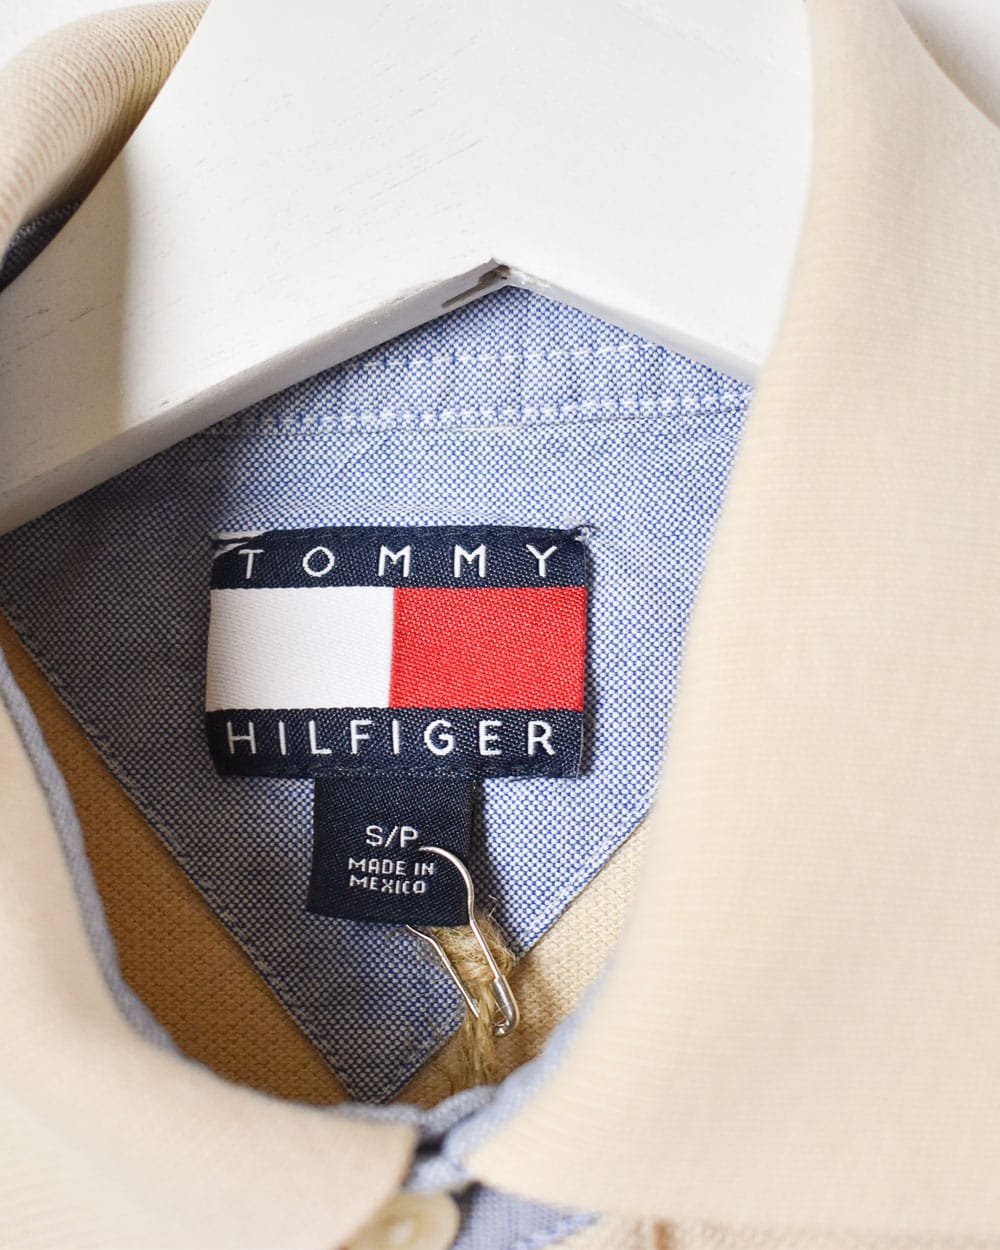 Neutral Tommy Hilfiger Polo Shirt - Small